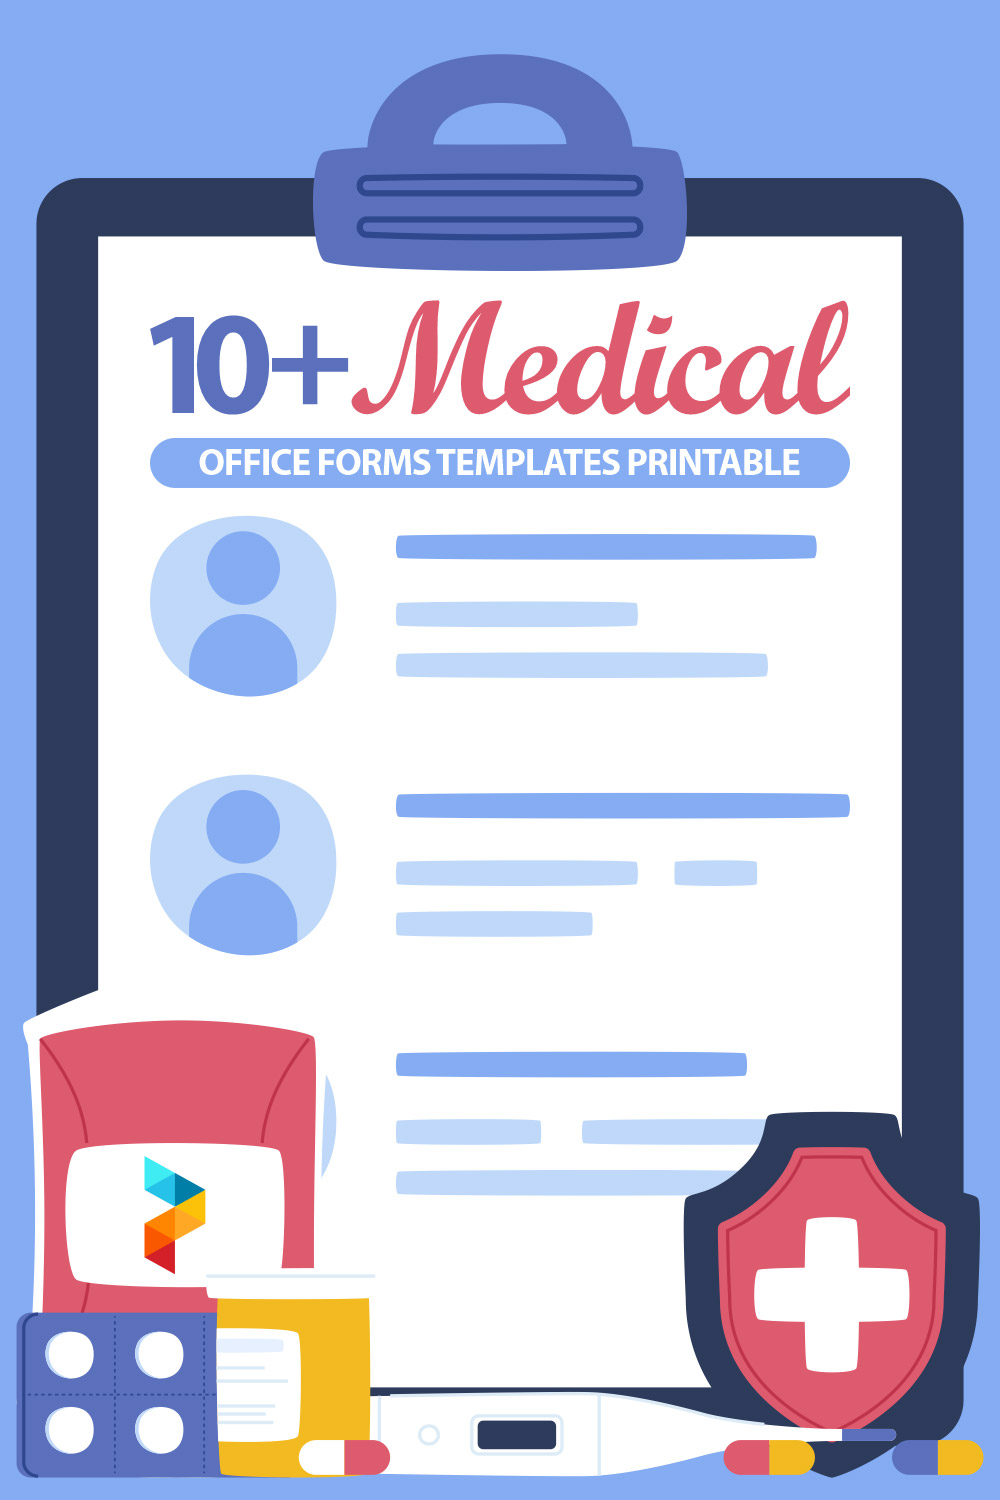 Medical Office Forms Templates Printable